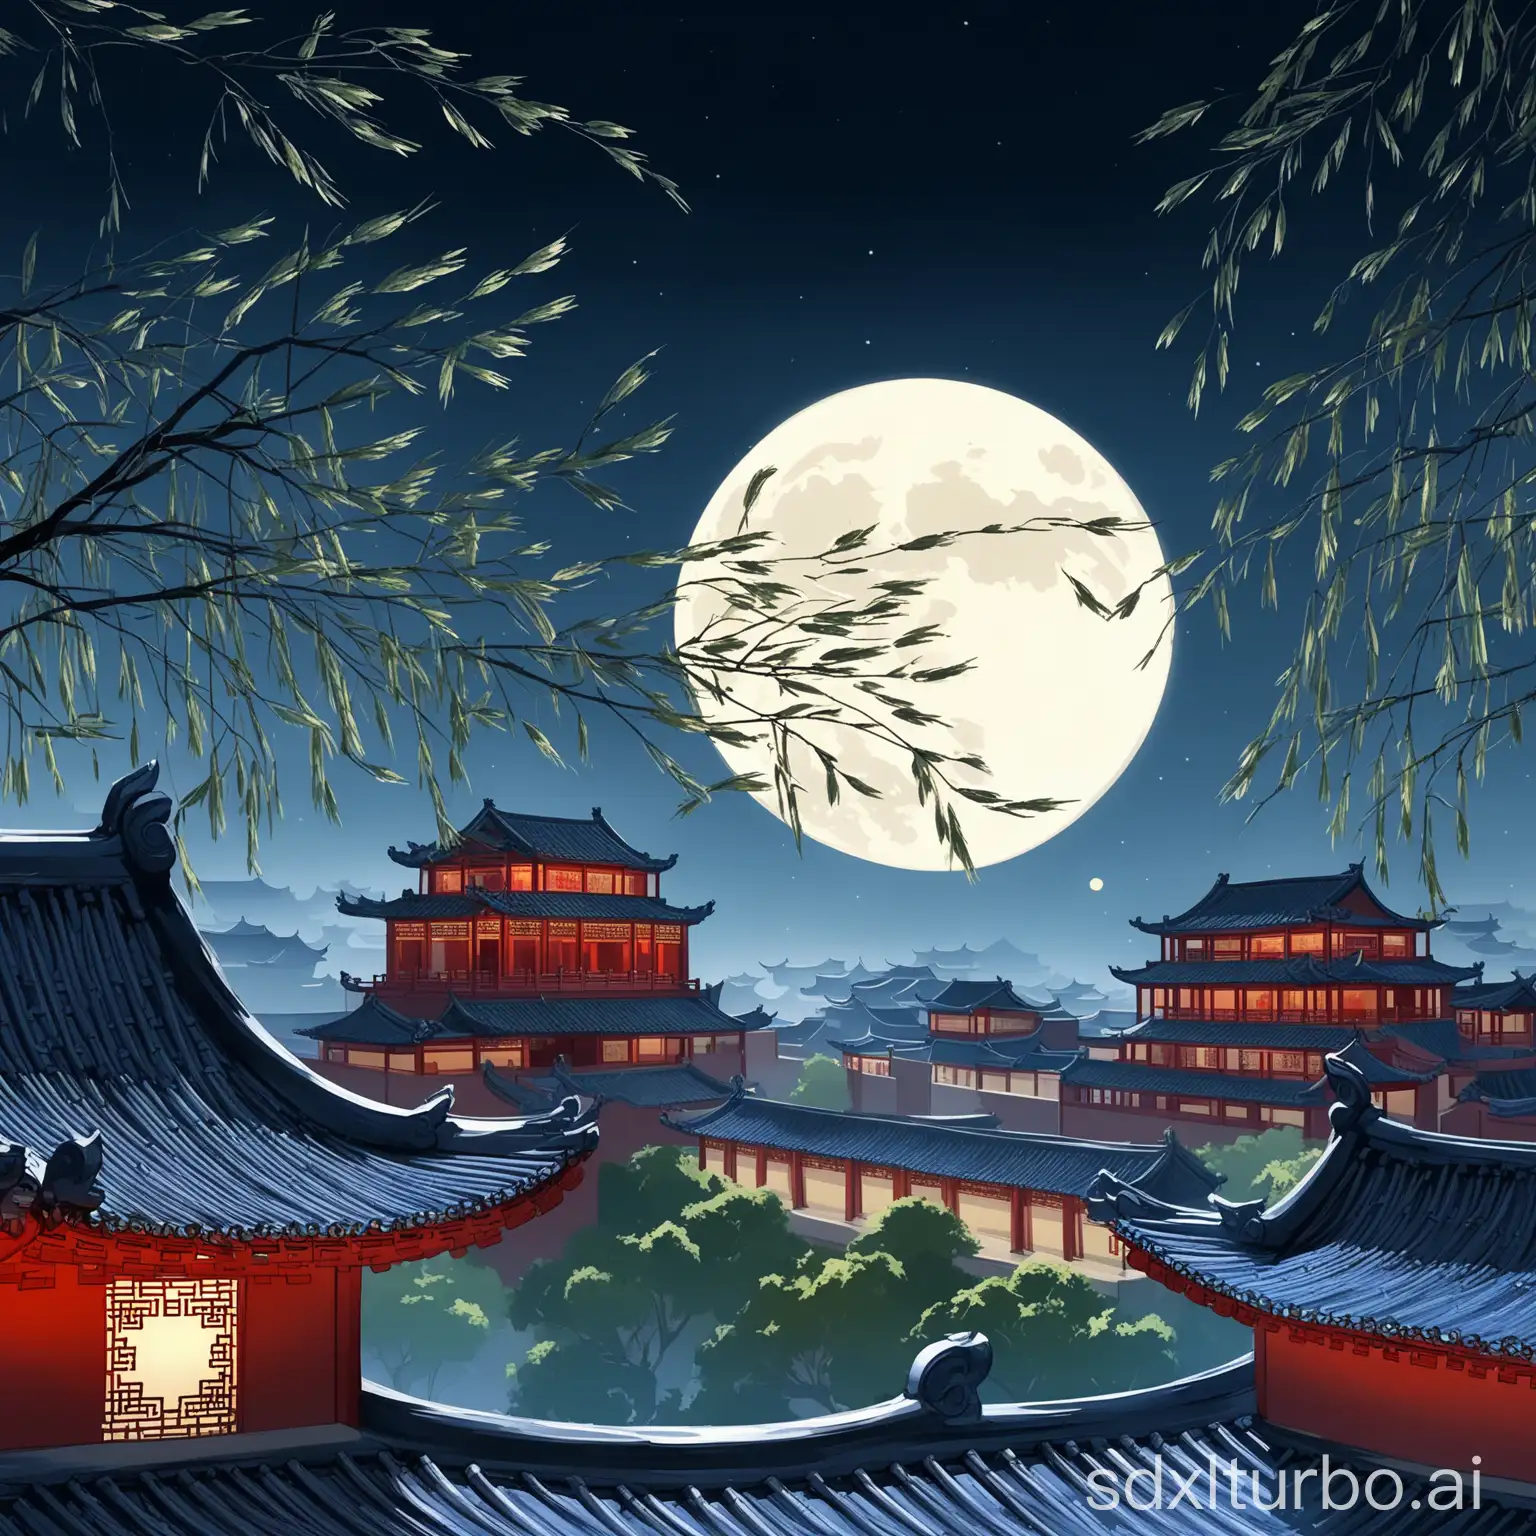 grand and round and bright moonlight, on top of classical Chinese architecture roofs, willow tree leaves swaying in the wind